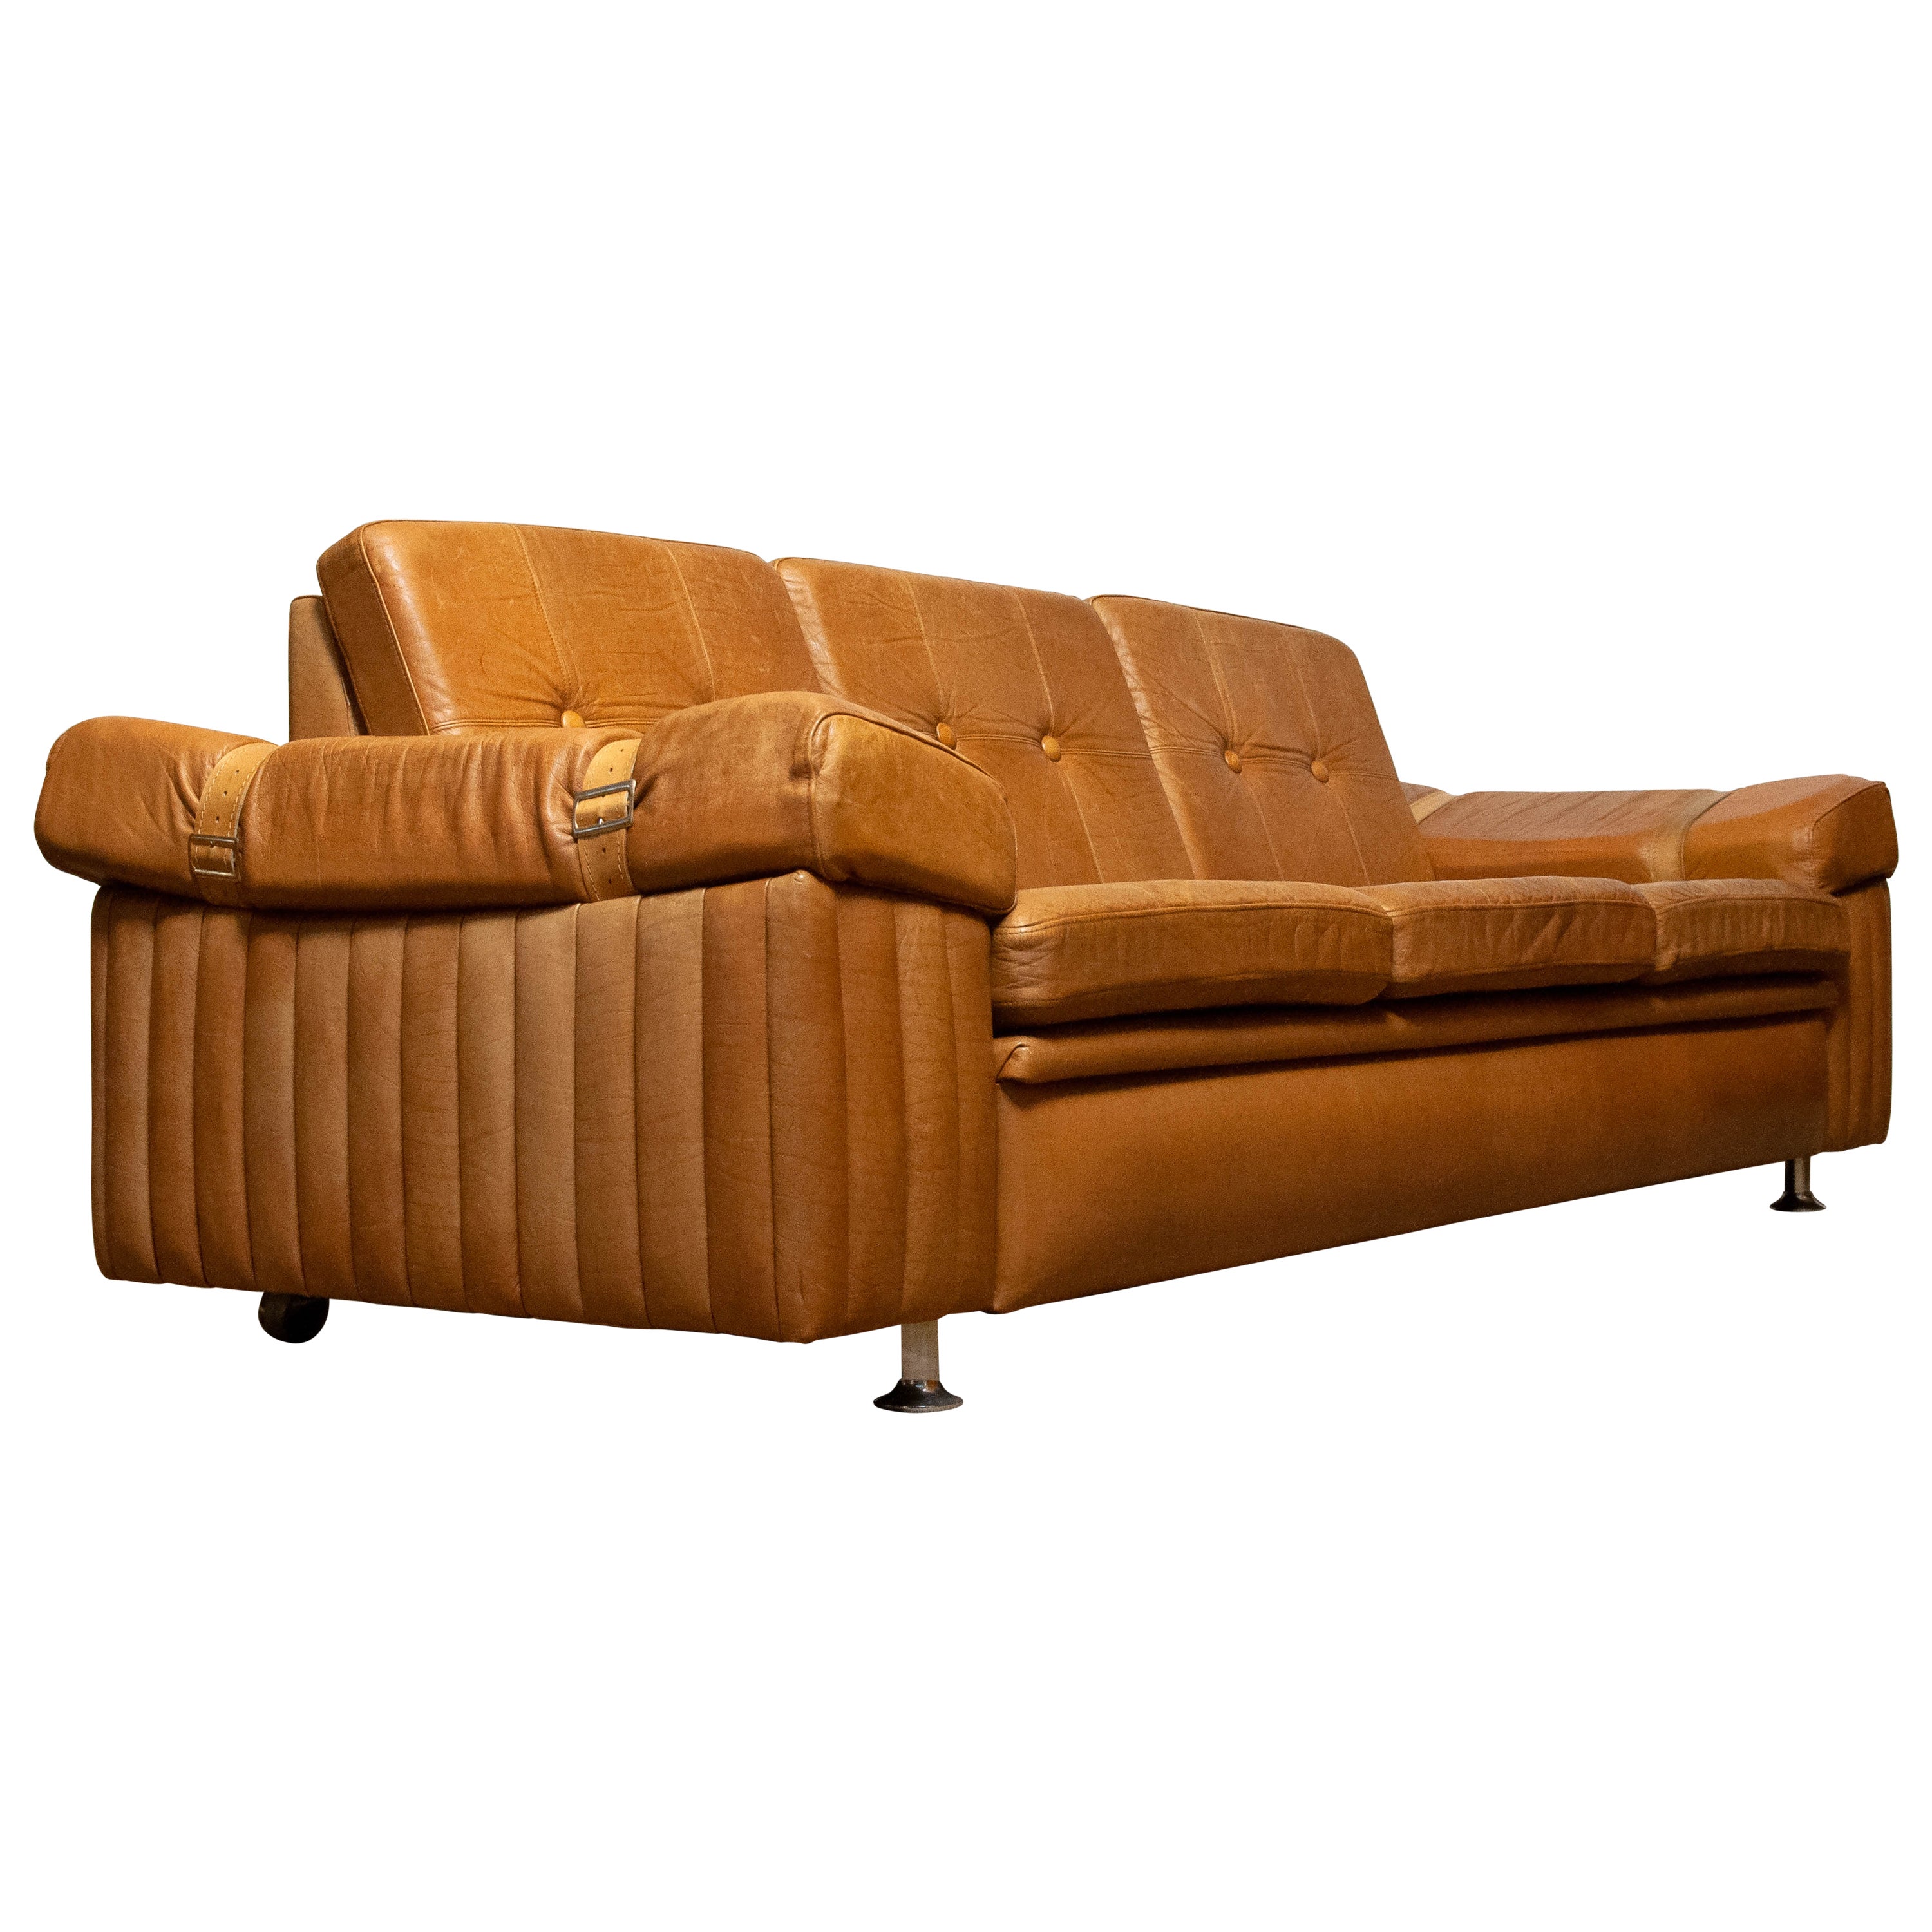 1970s Scandinavian Brutalist Three-Seater Low-Back Sofa in Camel Colored Leather For Sale